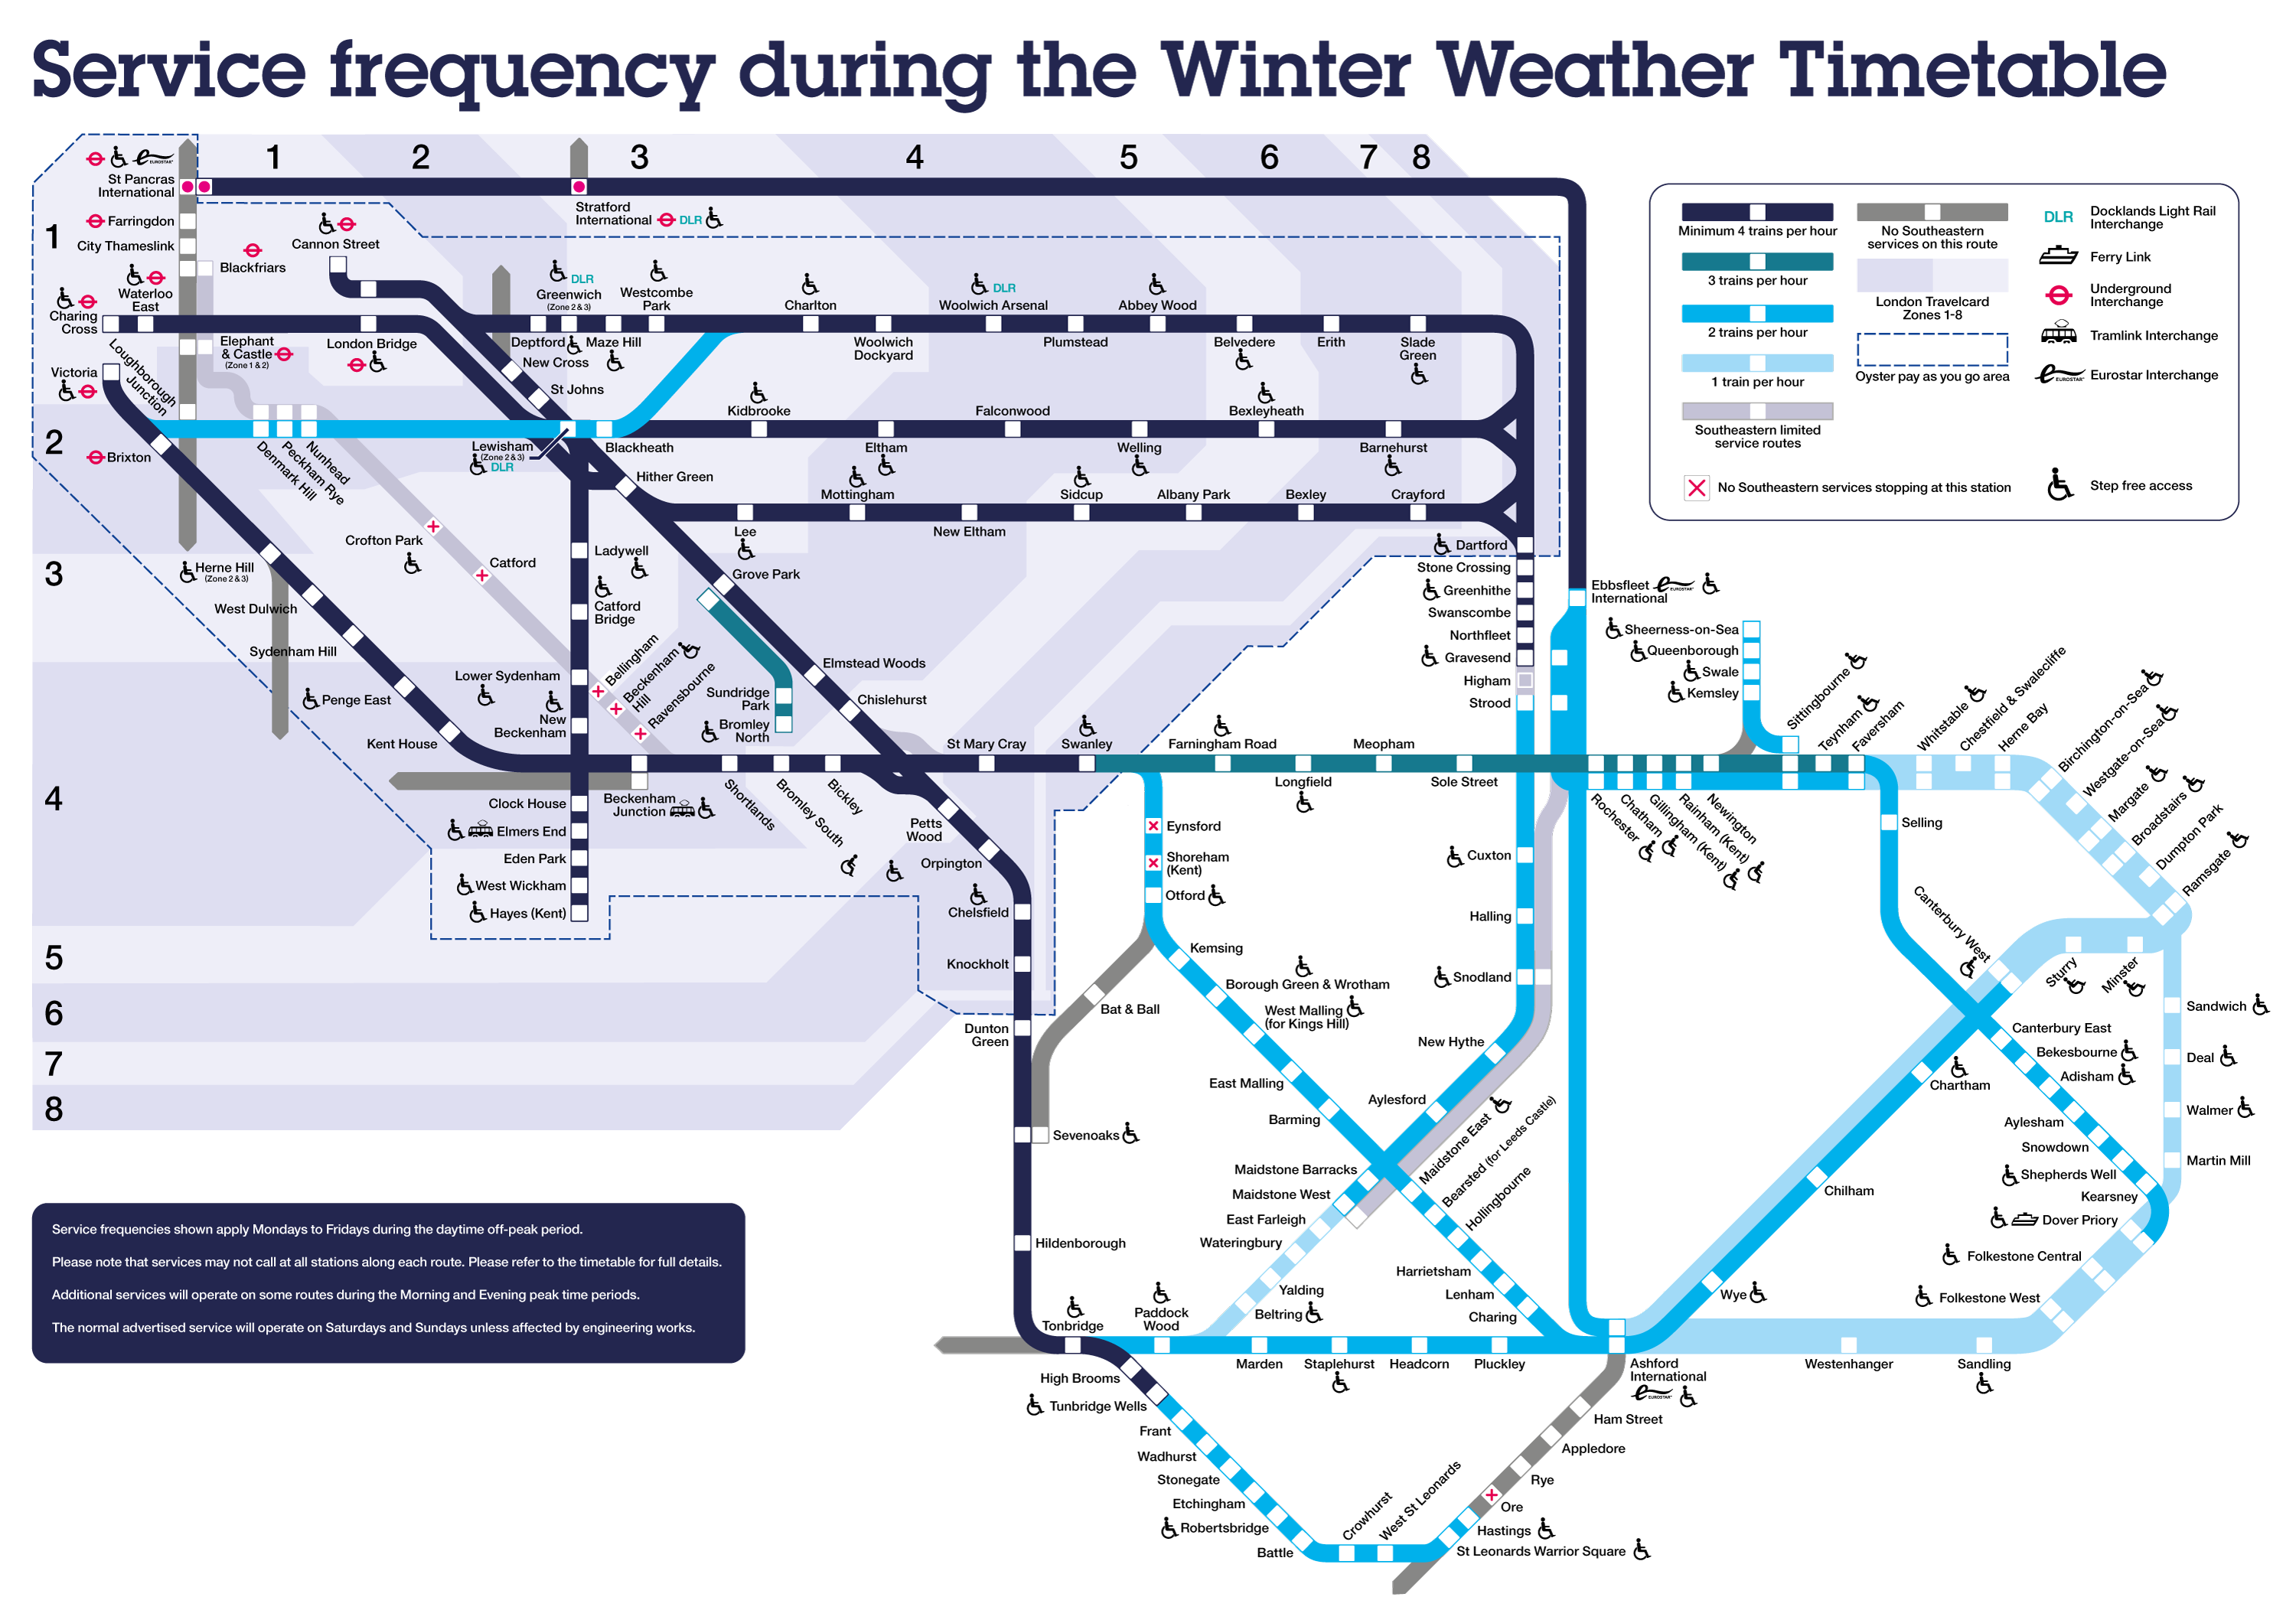 Service frequency during the Winter Weather Timetable